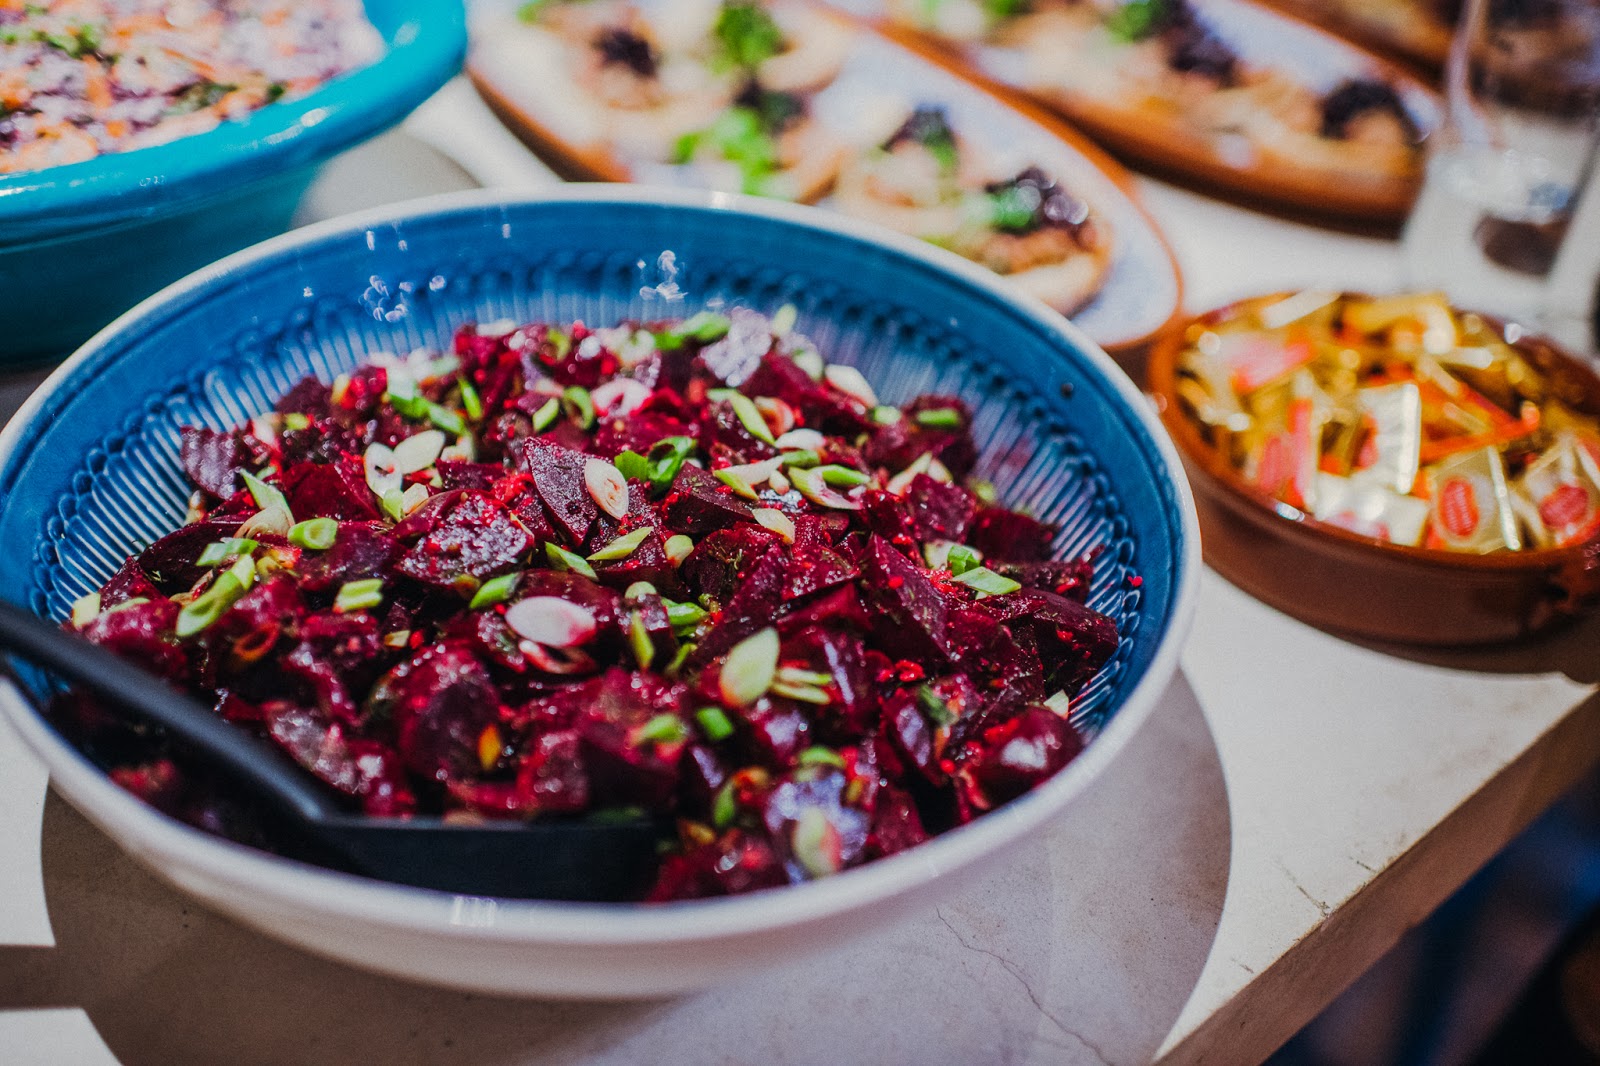 Beetroot salad in a blue bowl.